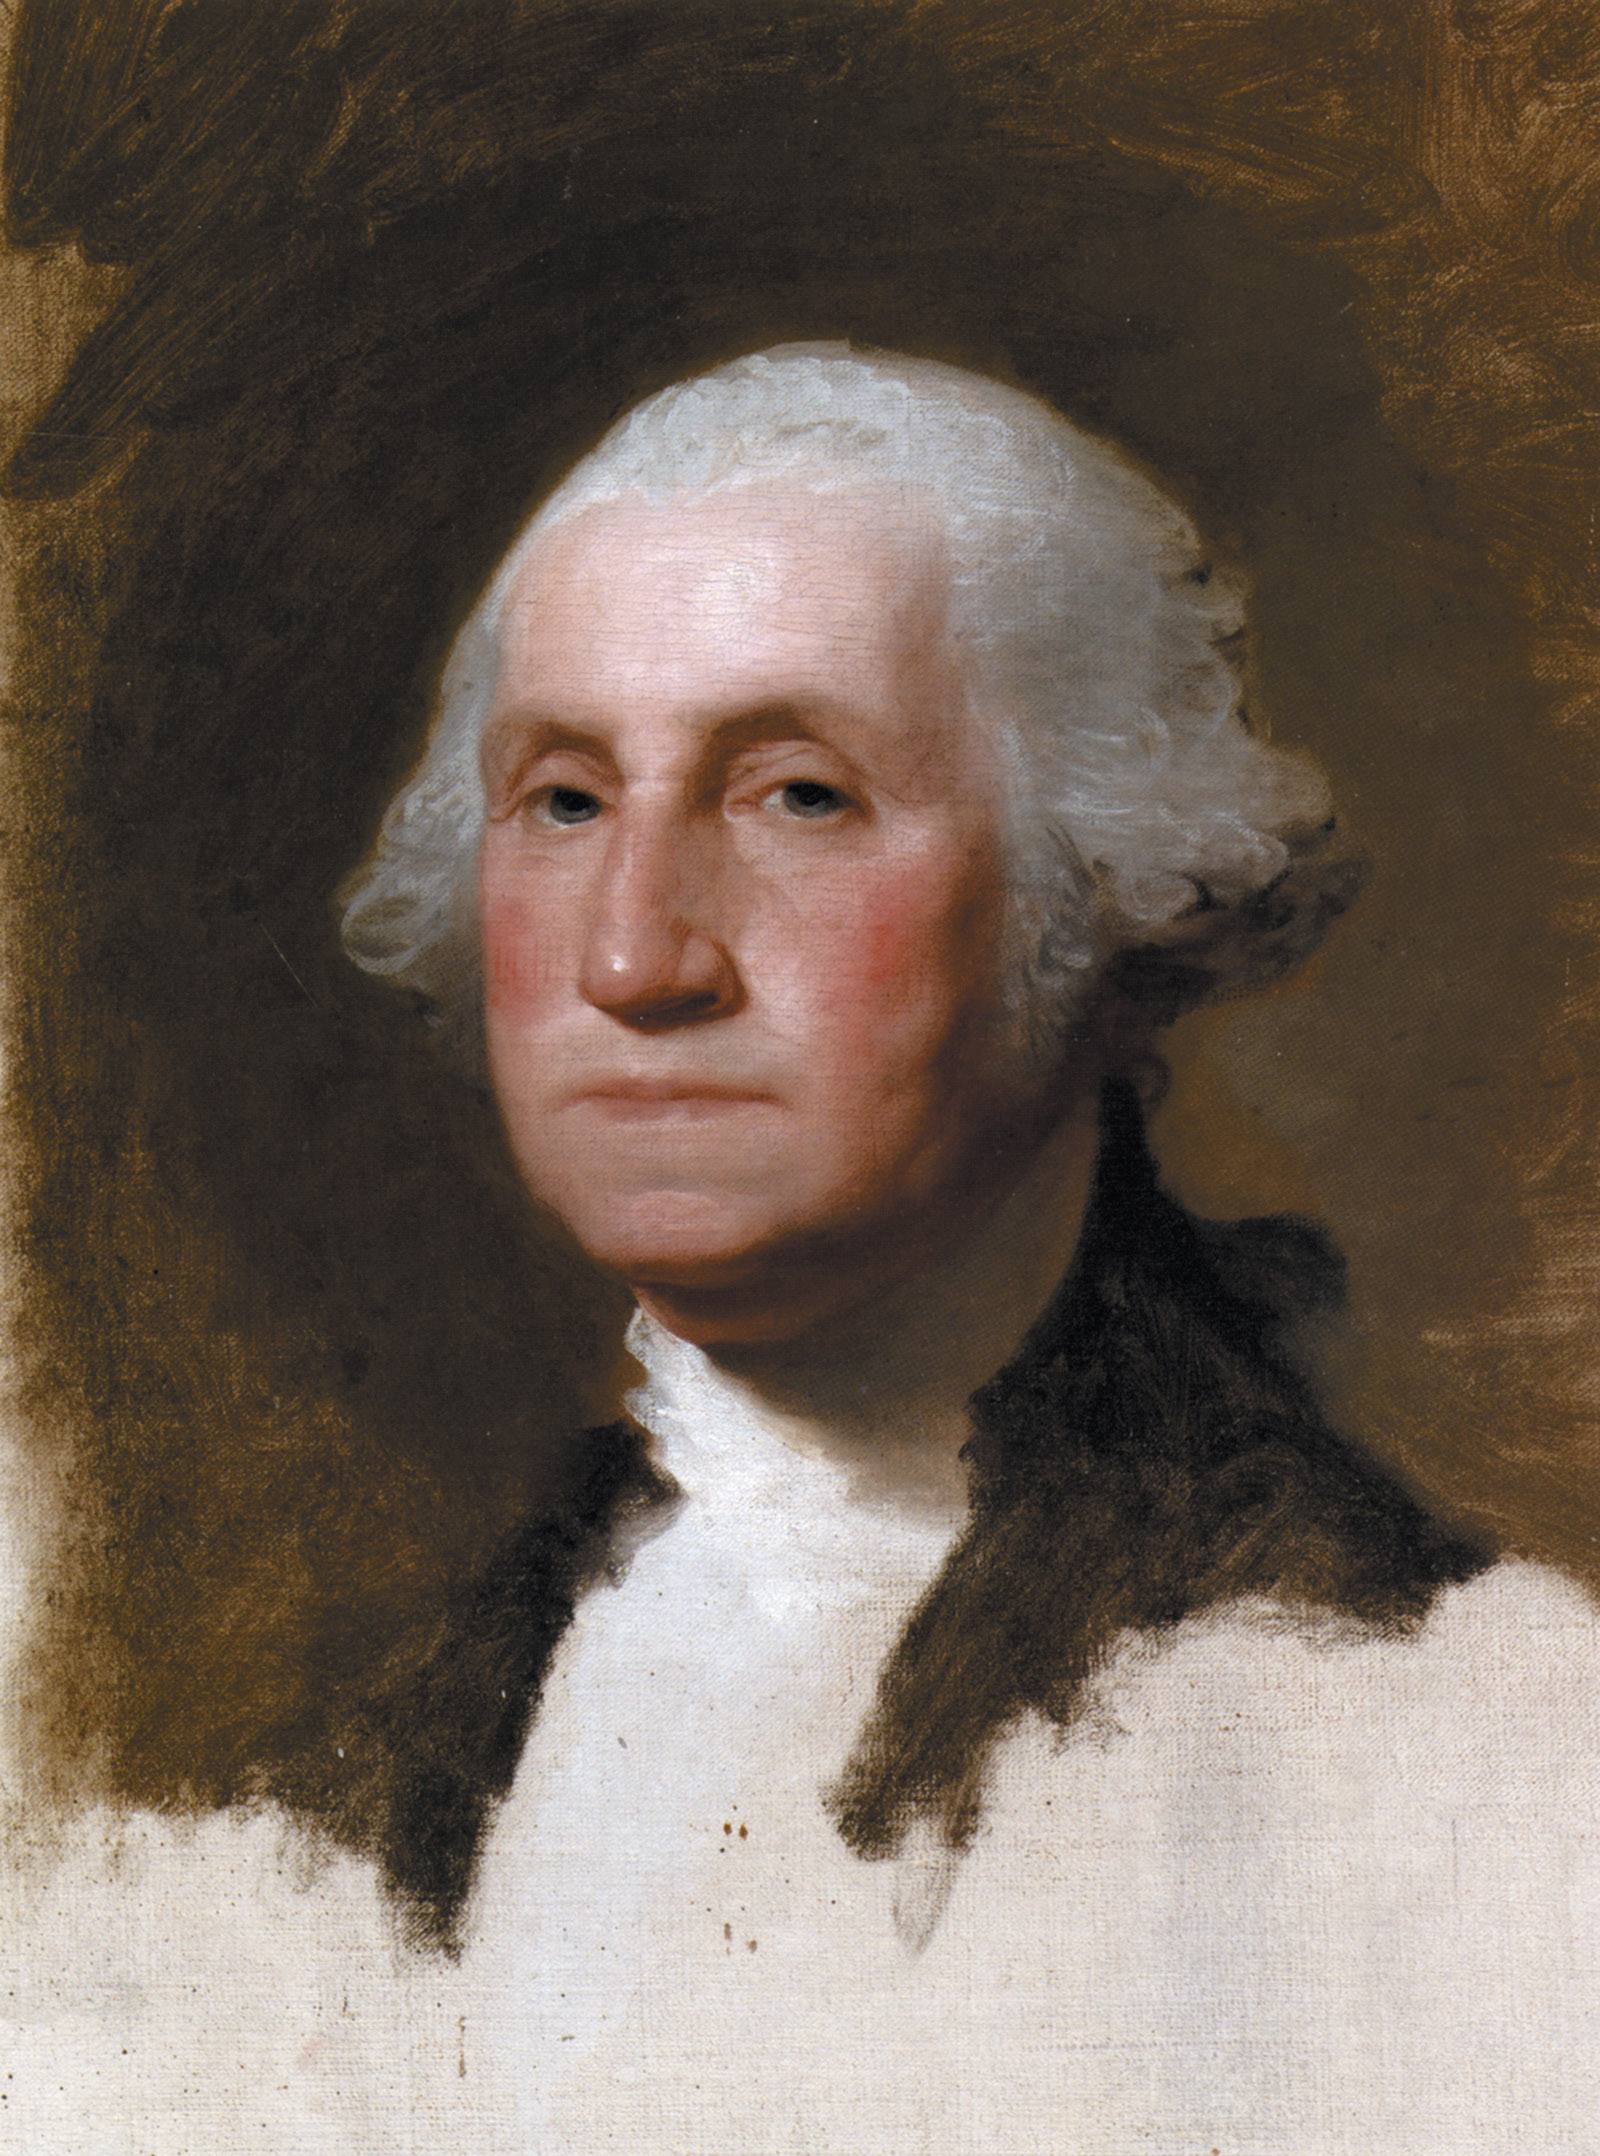 Gilbert Stuart: George Washington (The Athenaeum Portrait), 1796; from Susan Rather’s The American School: Artists and Status in the Late Colonial and Early National Era, published by the Paul Mellon Centre for Studies in British Art and Yale University Press